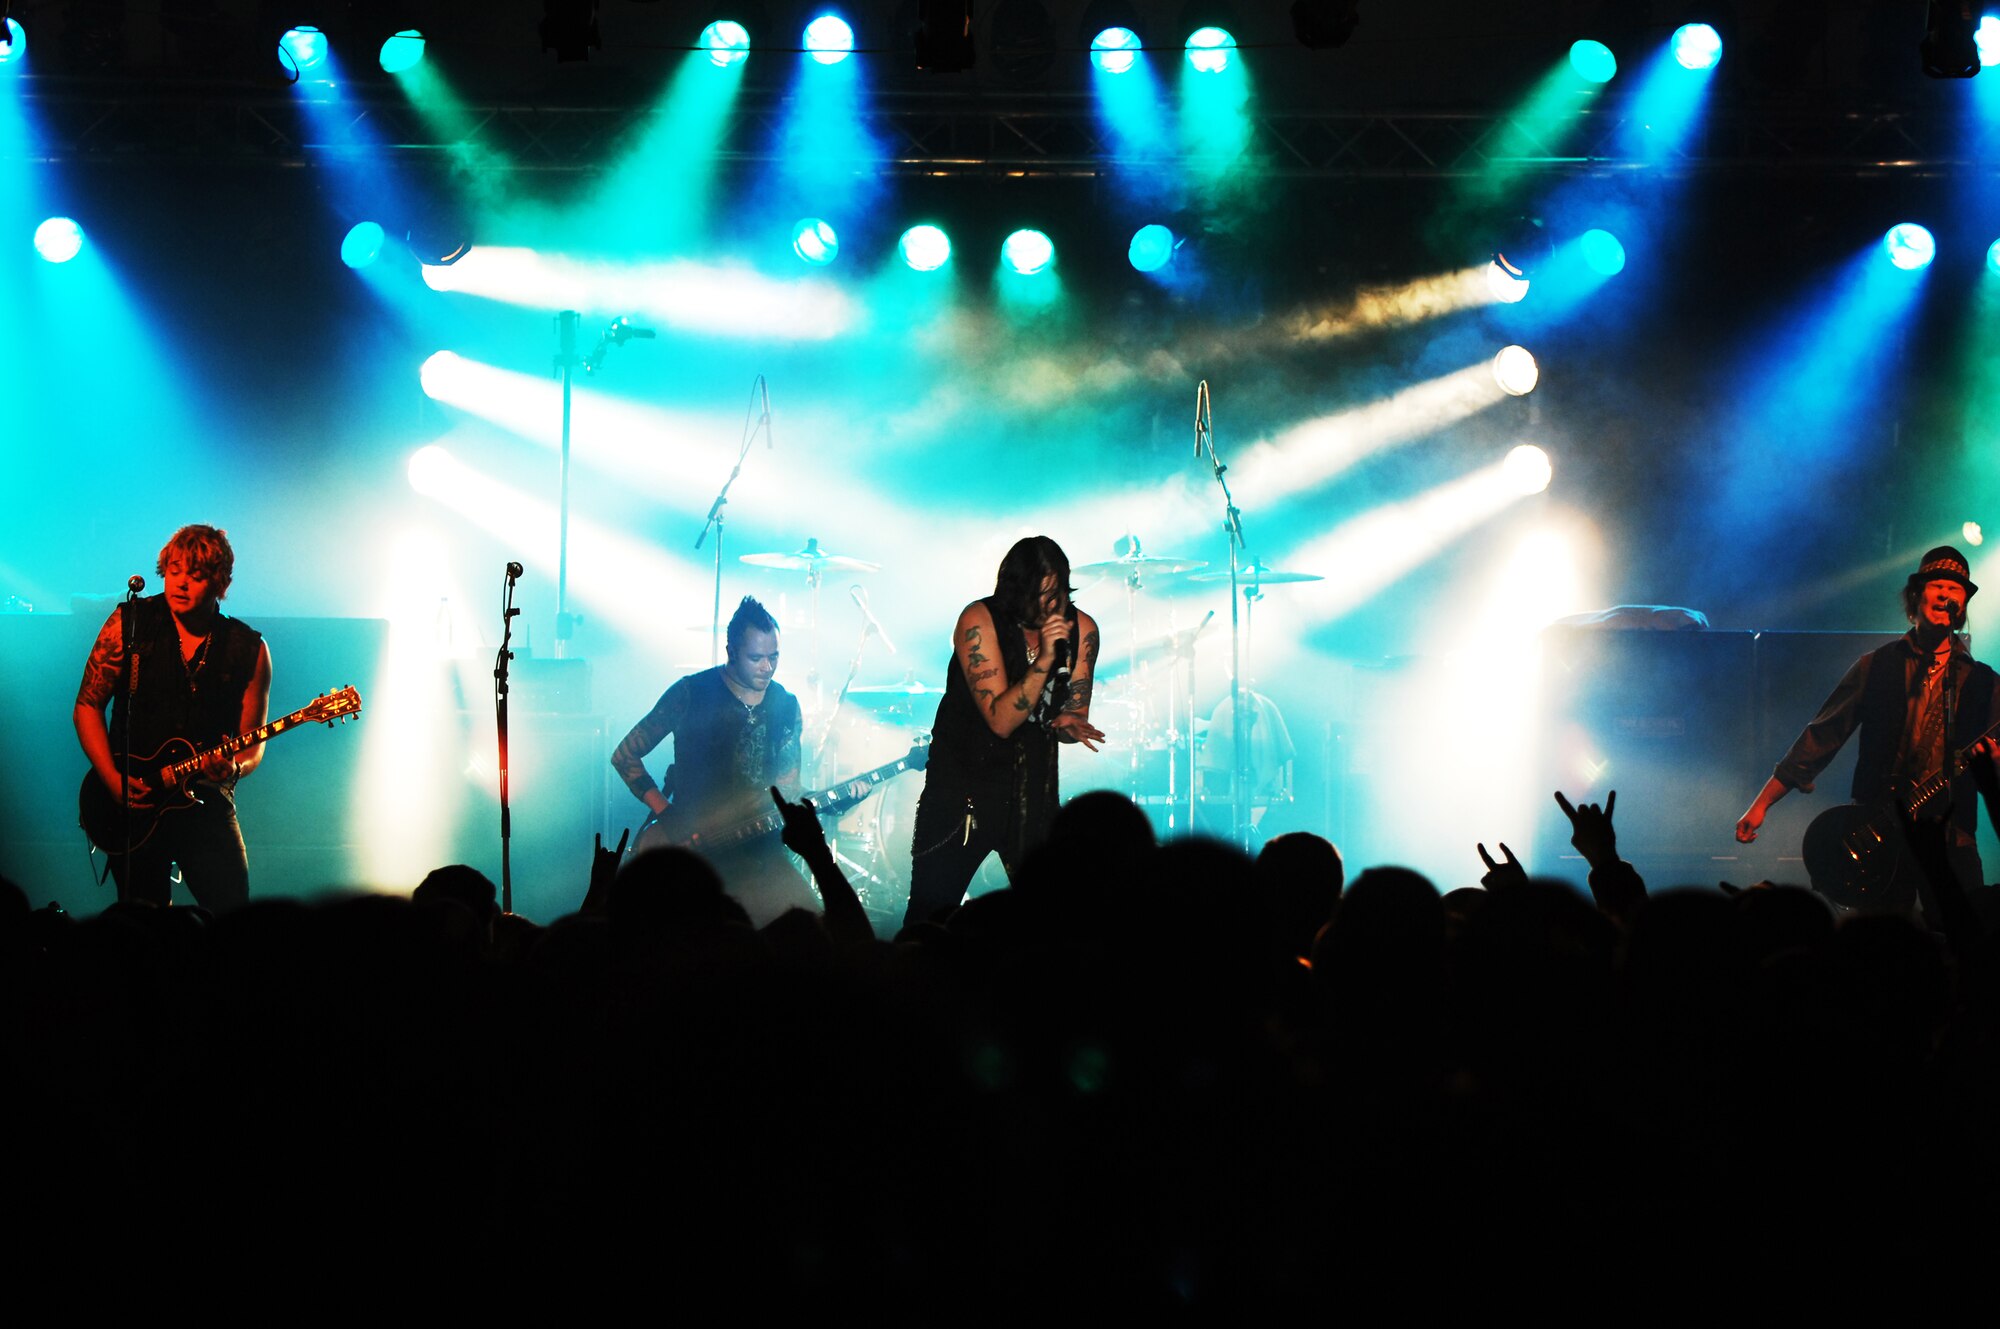 Rock band Hinder performs for servicemembers and their families, June 5, 2009, Ramstein Air Base, Germany. The Armed Forces Entertainment and Navy Entertainment indulged servicemembers overseas and at remote and isolated locations with entertainment to boost morale and welfare. (U.S. Air Force photo by Senior Airman Amber Bressler)